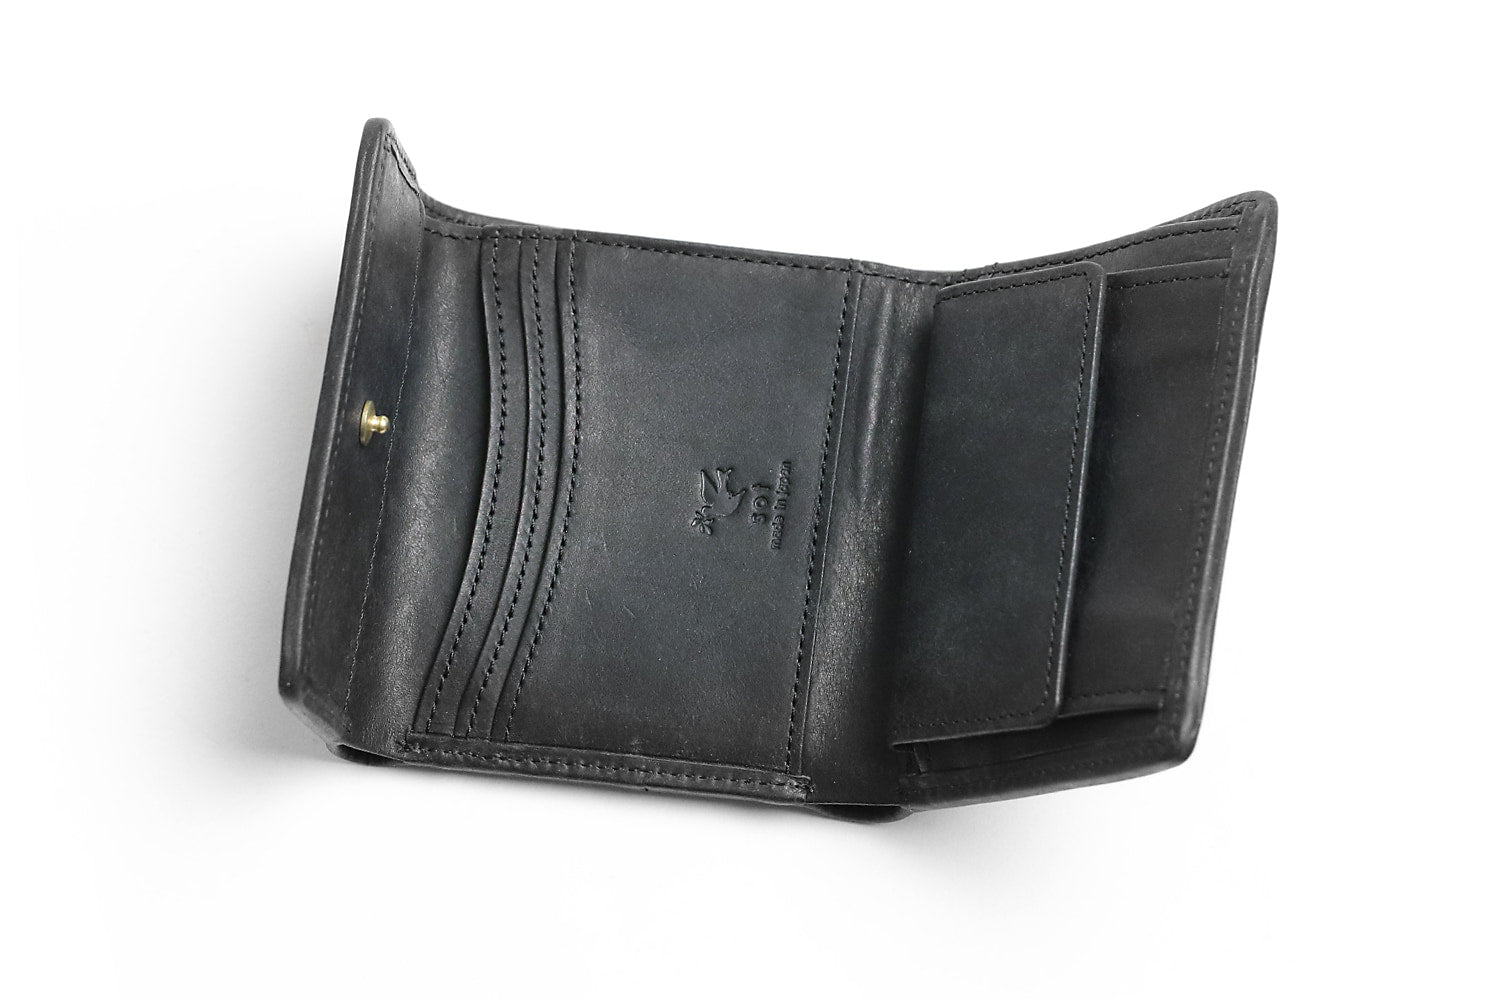 sot / Pueblo Leather Enjoy the unique aging effect. A compact wallet that stands out with its unique Italian leather charm. 